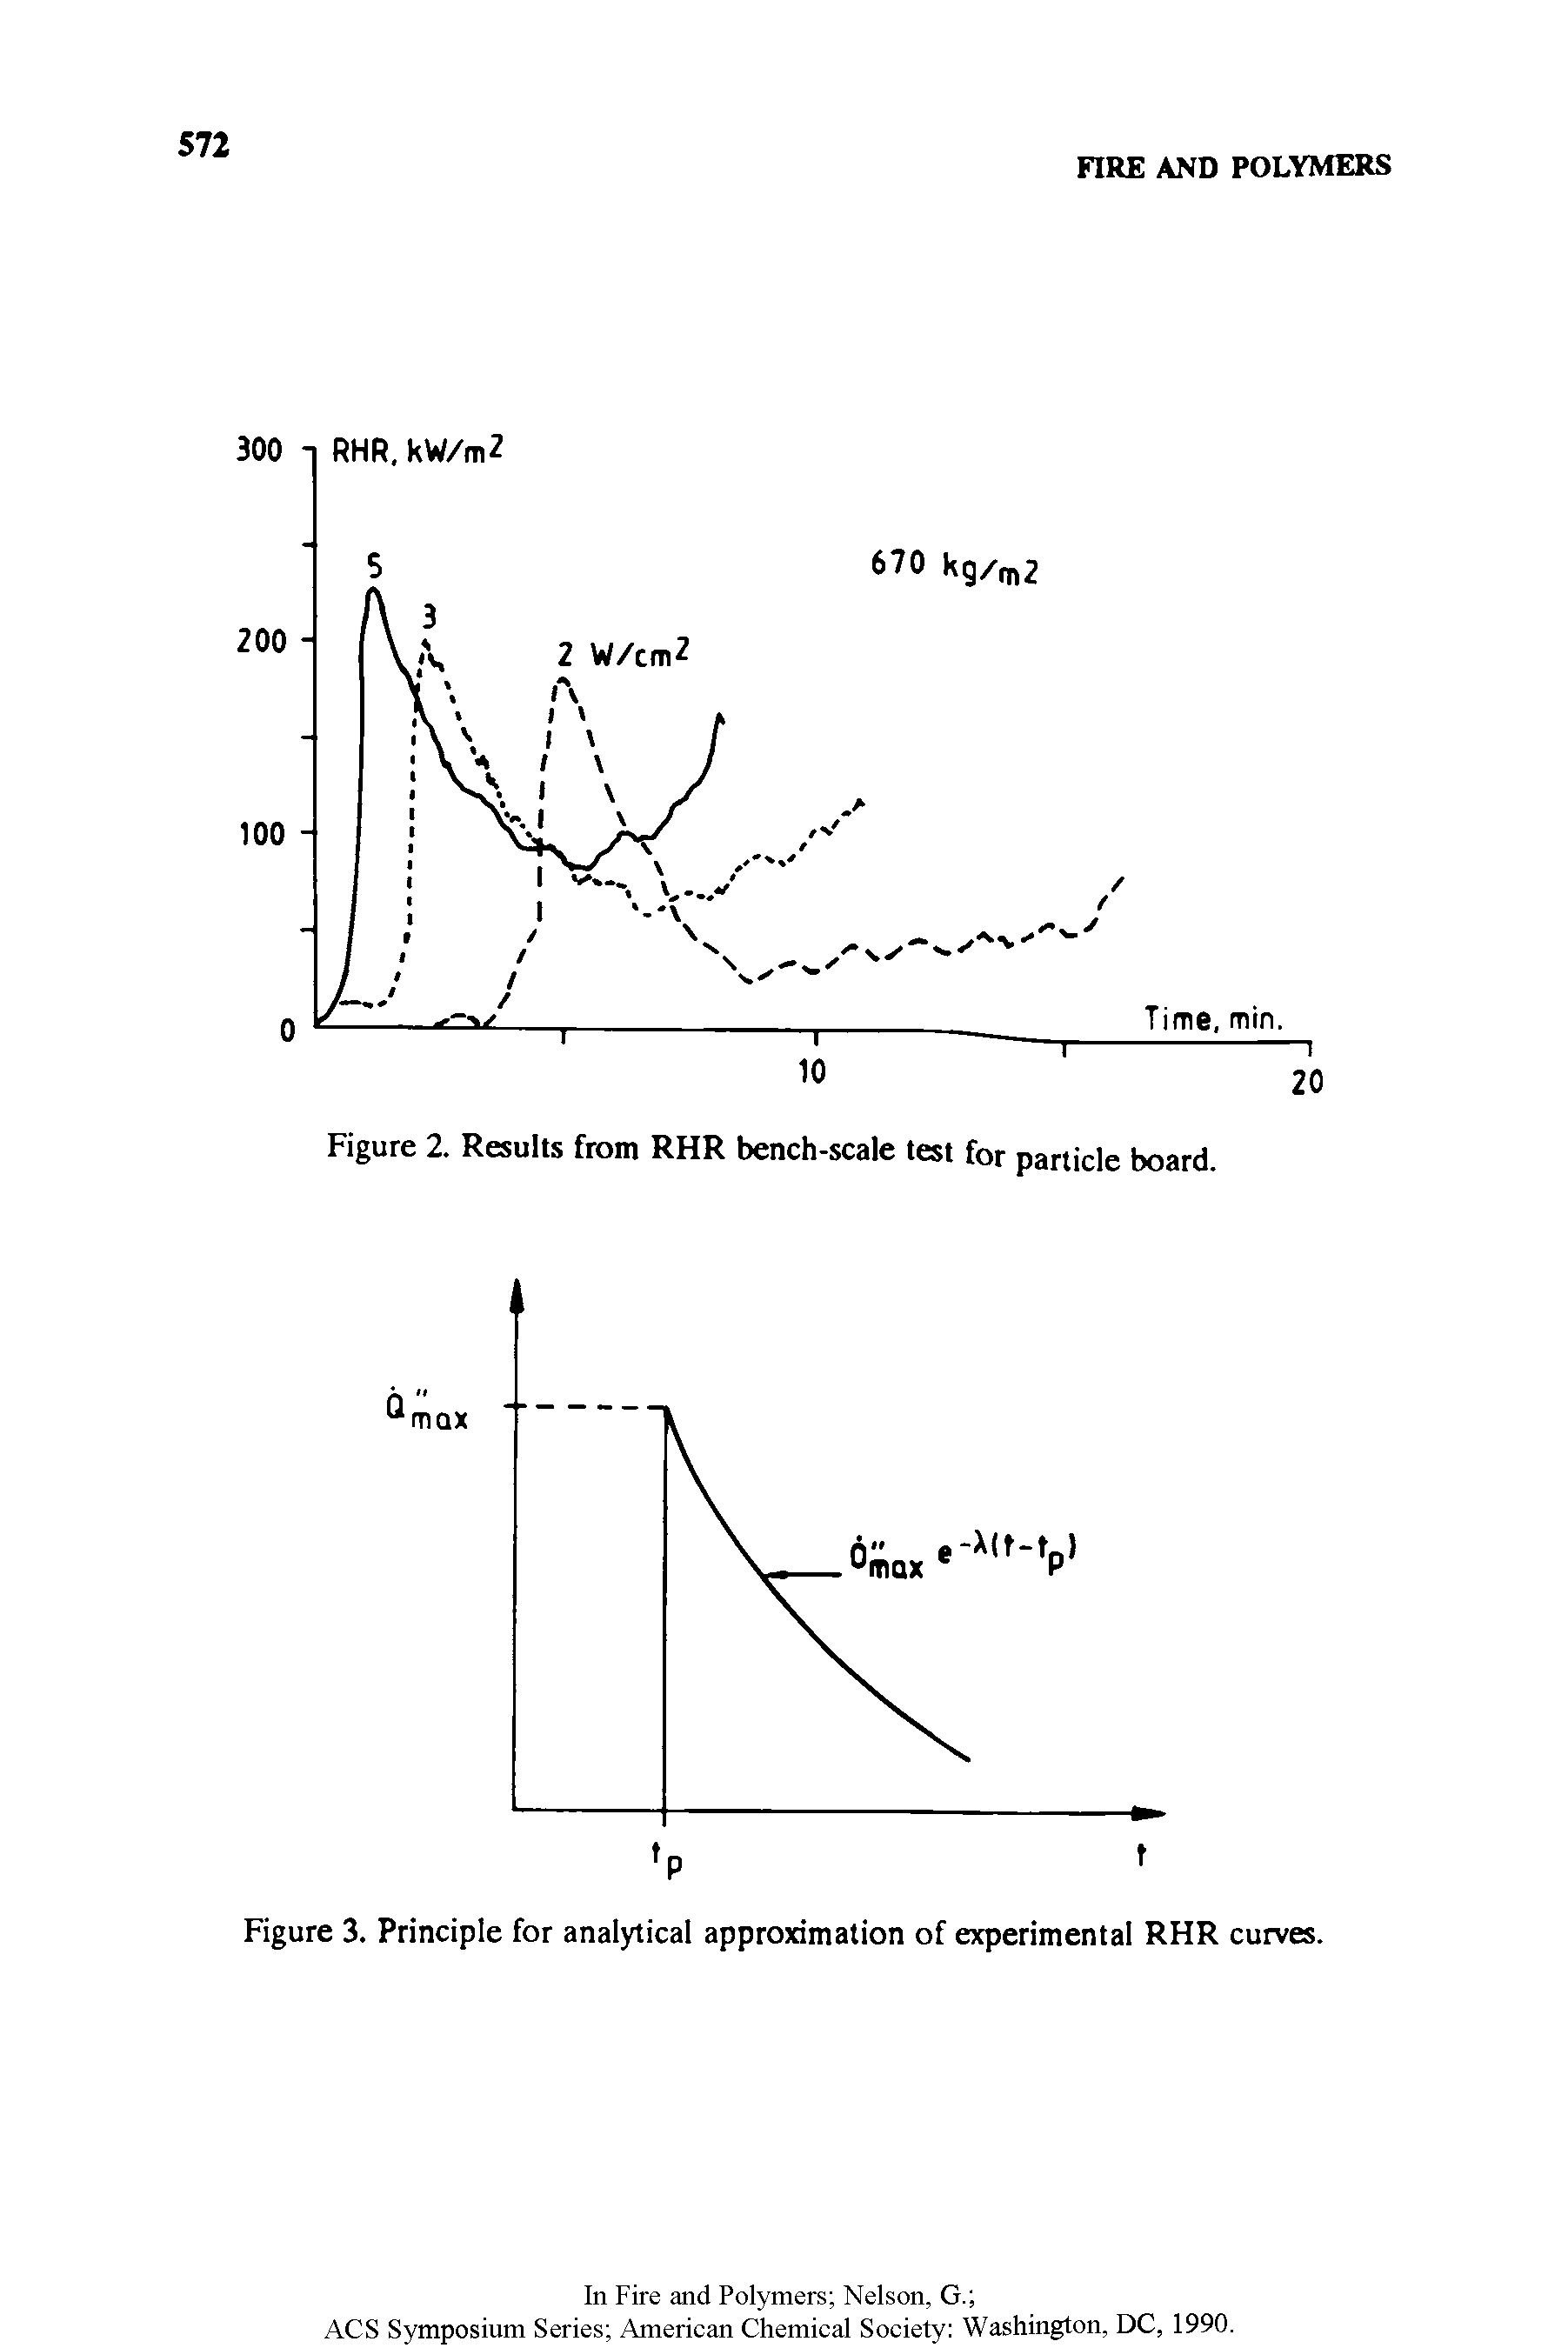 Figure 3. Principle for analytical approximation of experimental RHR curves.